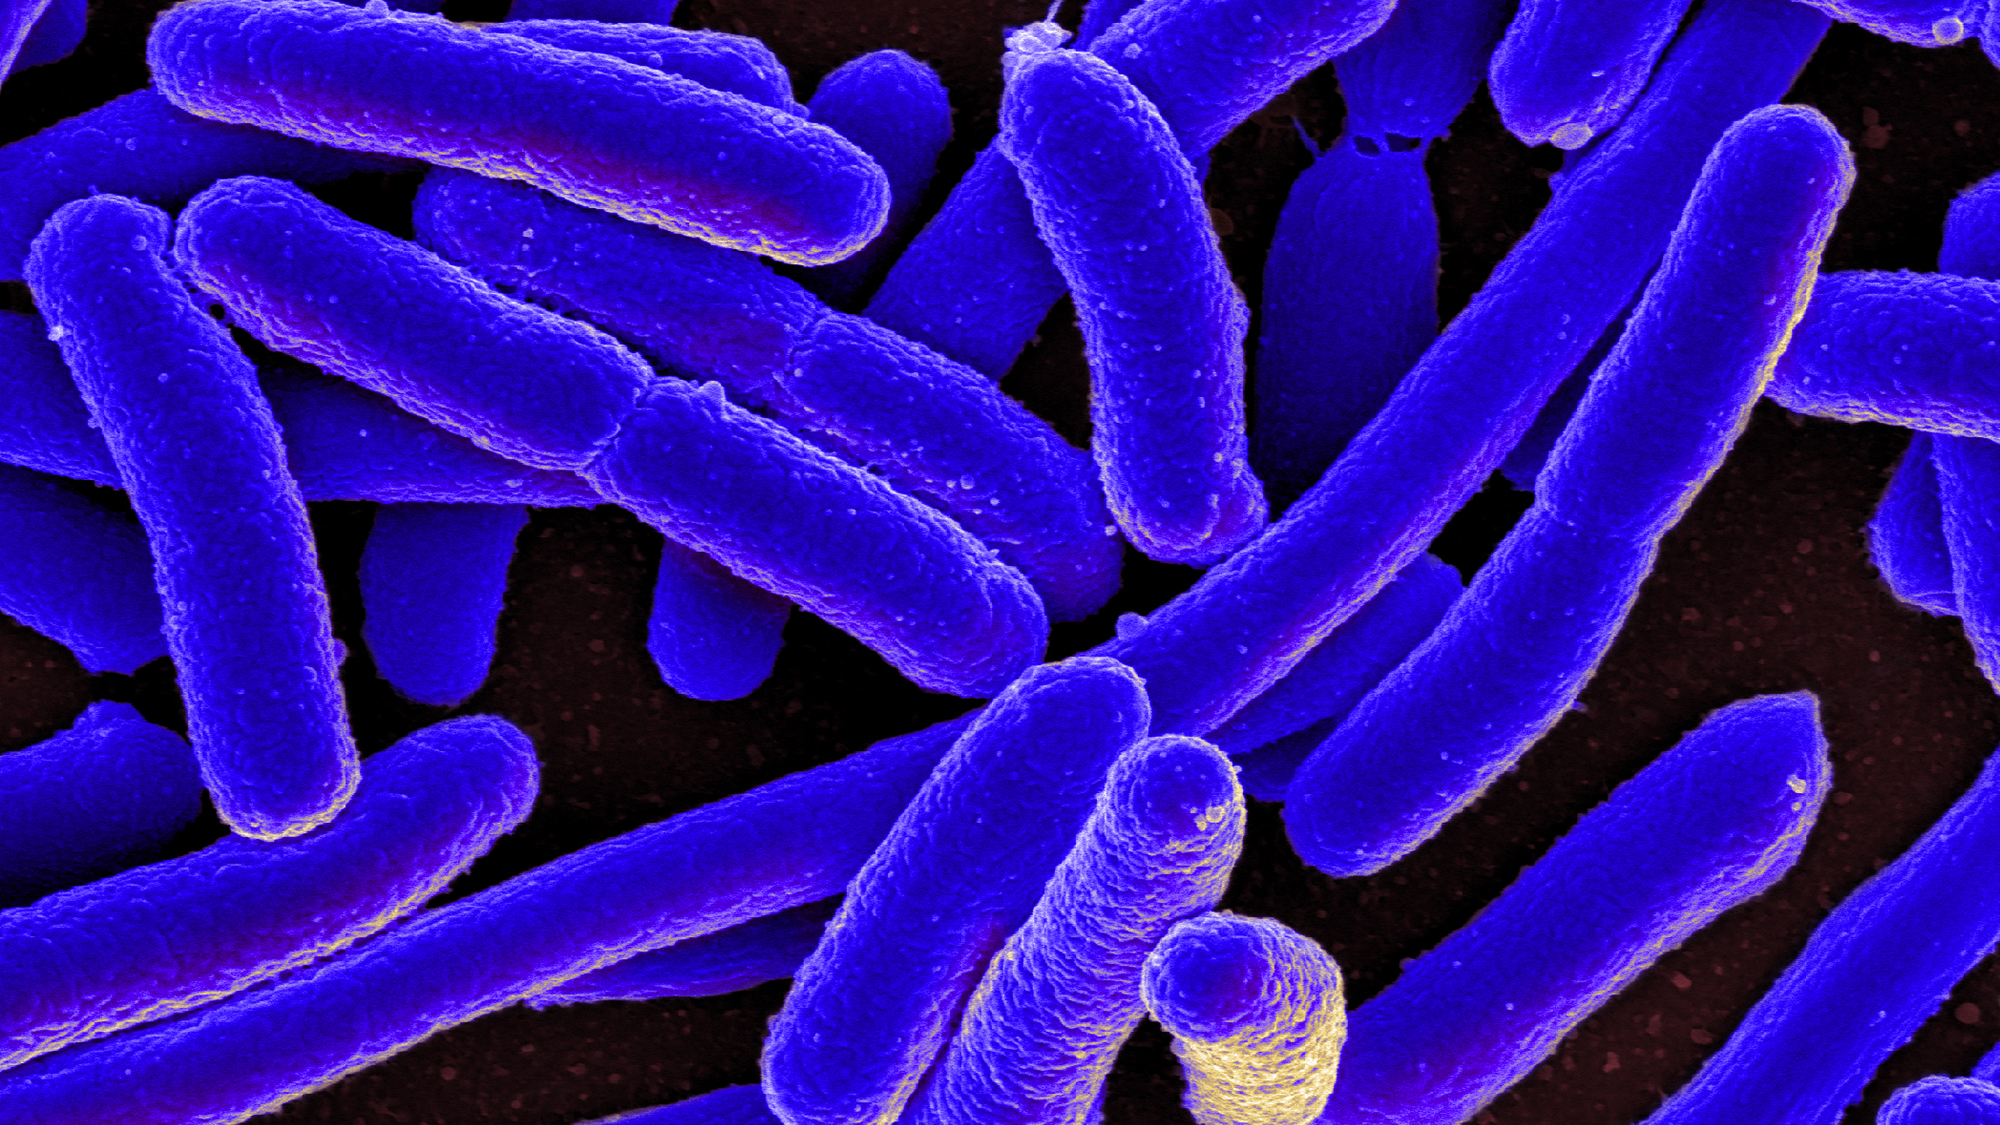 Escherichia coli is one of the bacteria that form our microbiota, along with Candida albicans and Staphylococcus aureus.